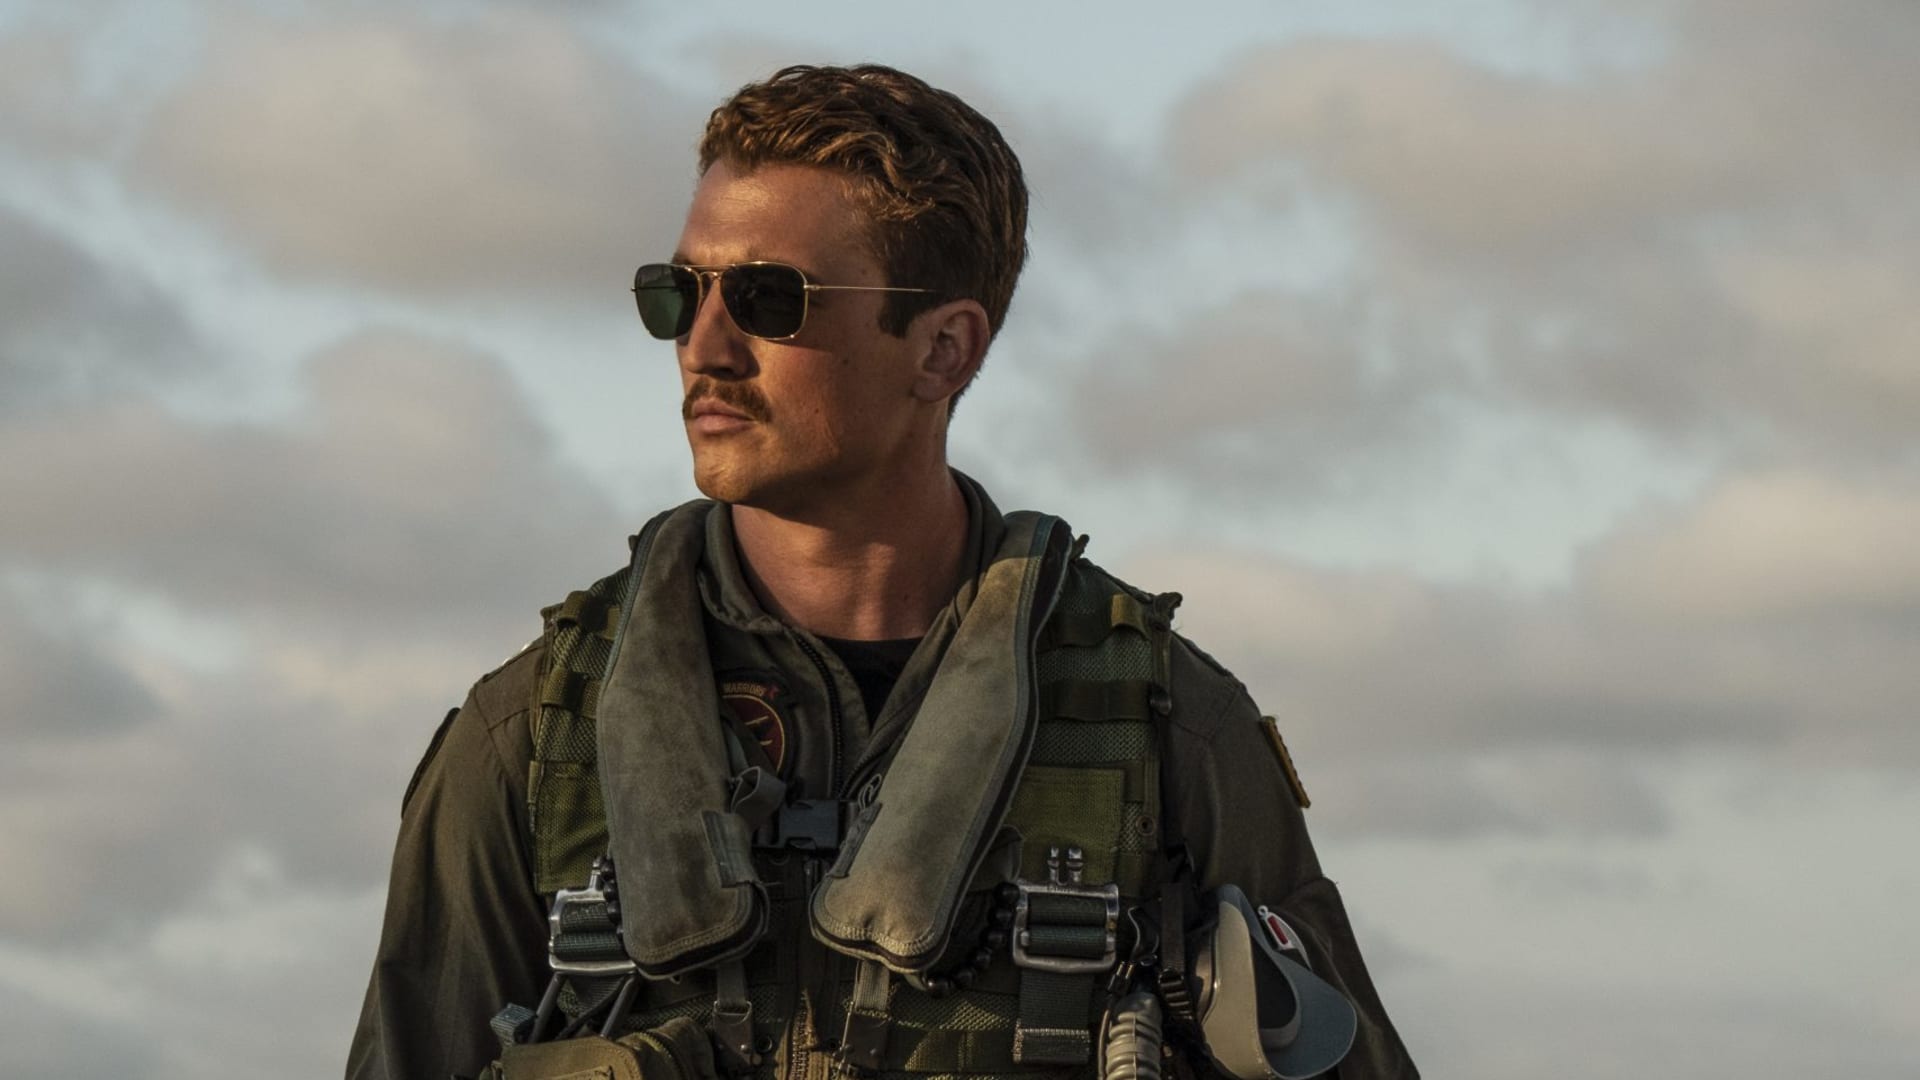 'Top Gun: Maverick' just passed 'Titanic' at the all-time domestic box office—These are the 10 highest grossing movies ever